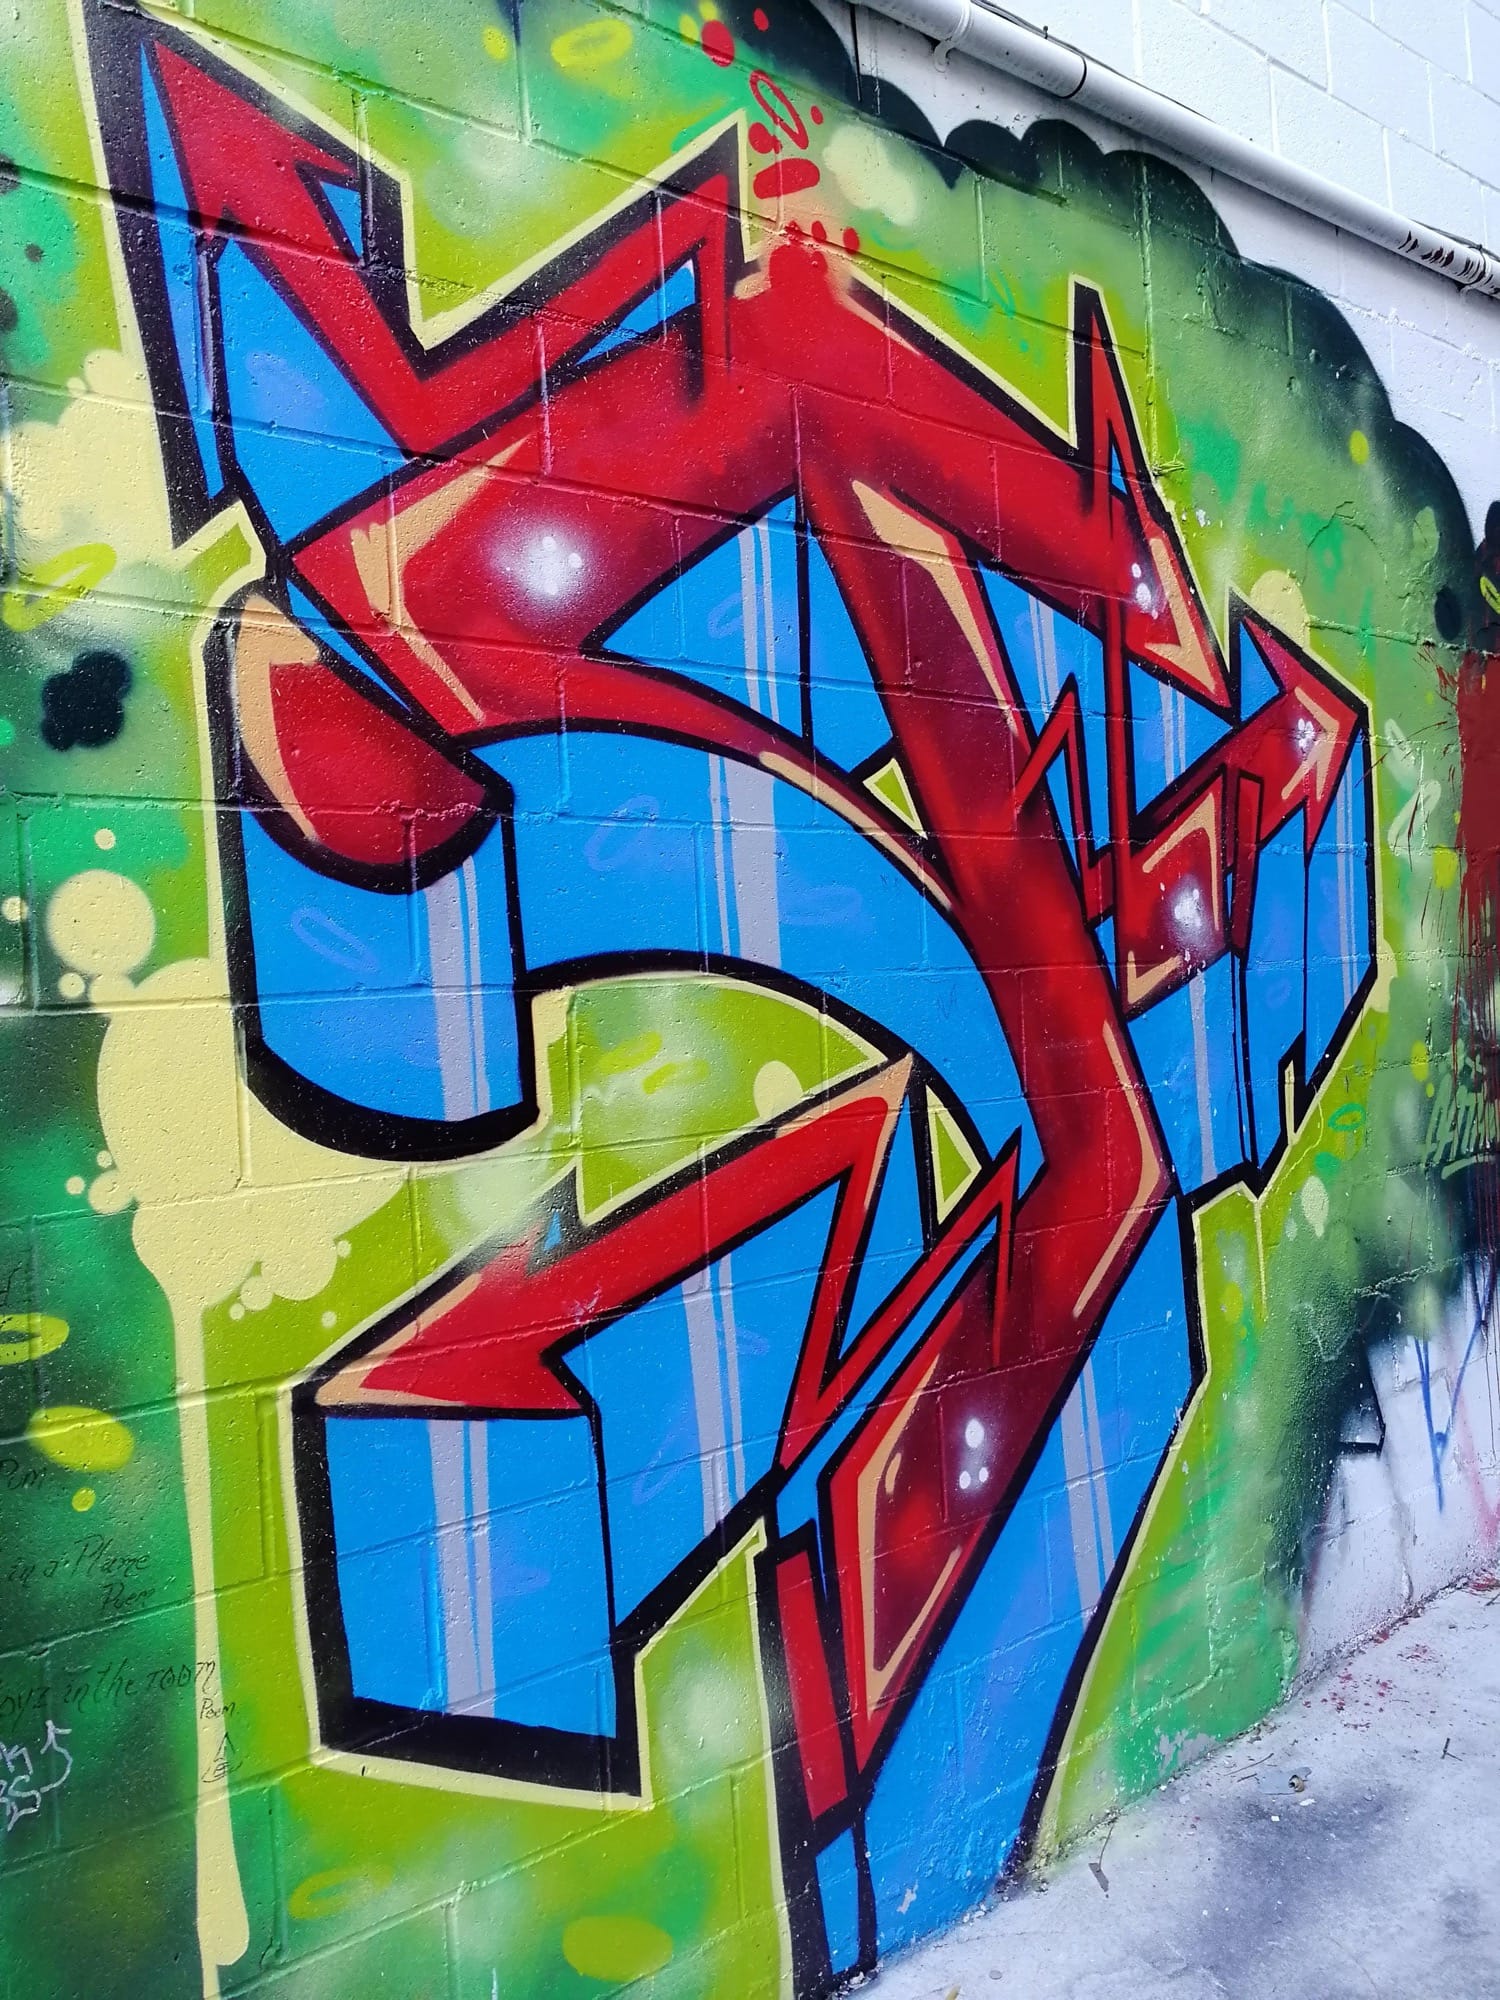 Graffiti 2399  captured by Rabot in Toronto Canada